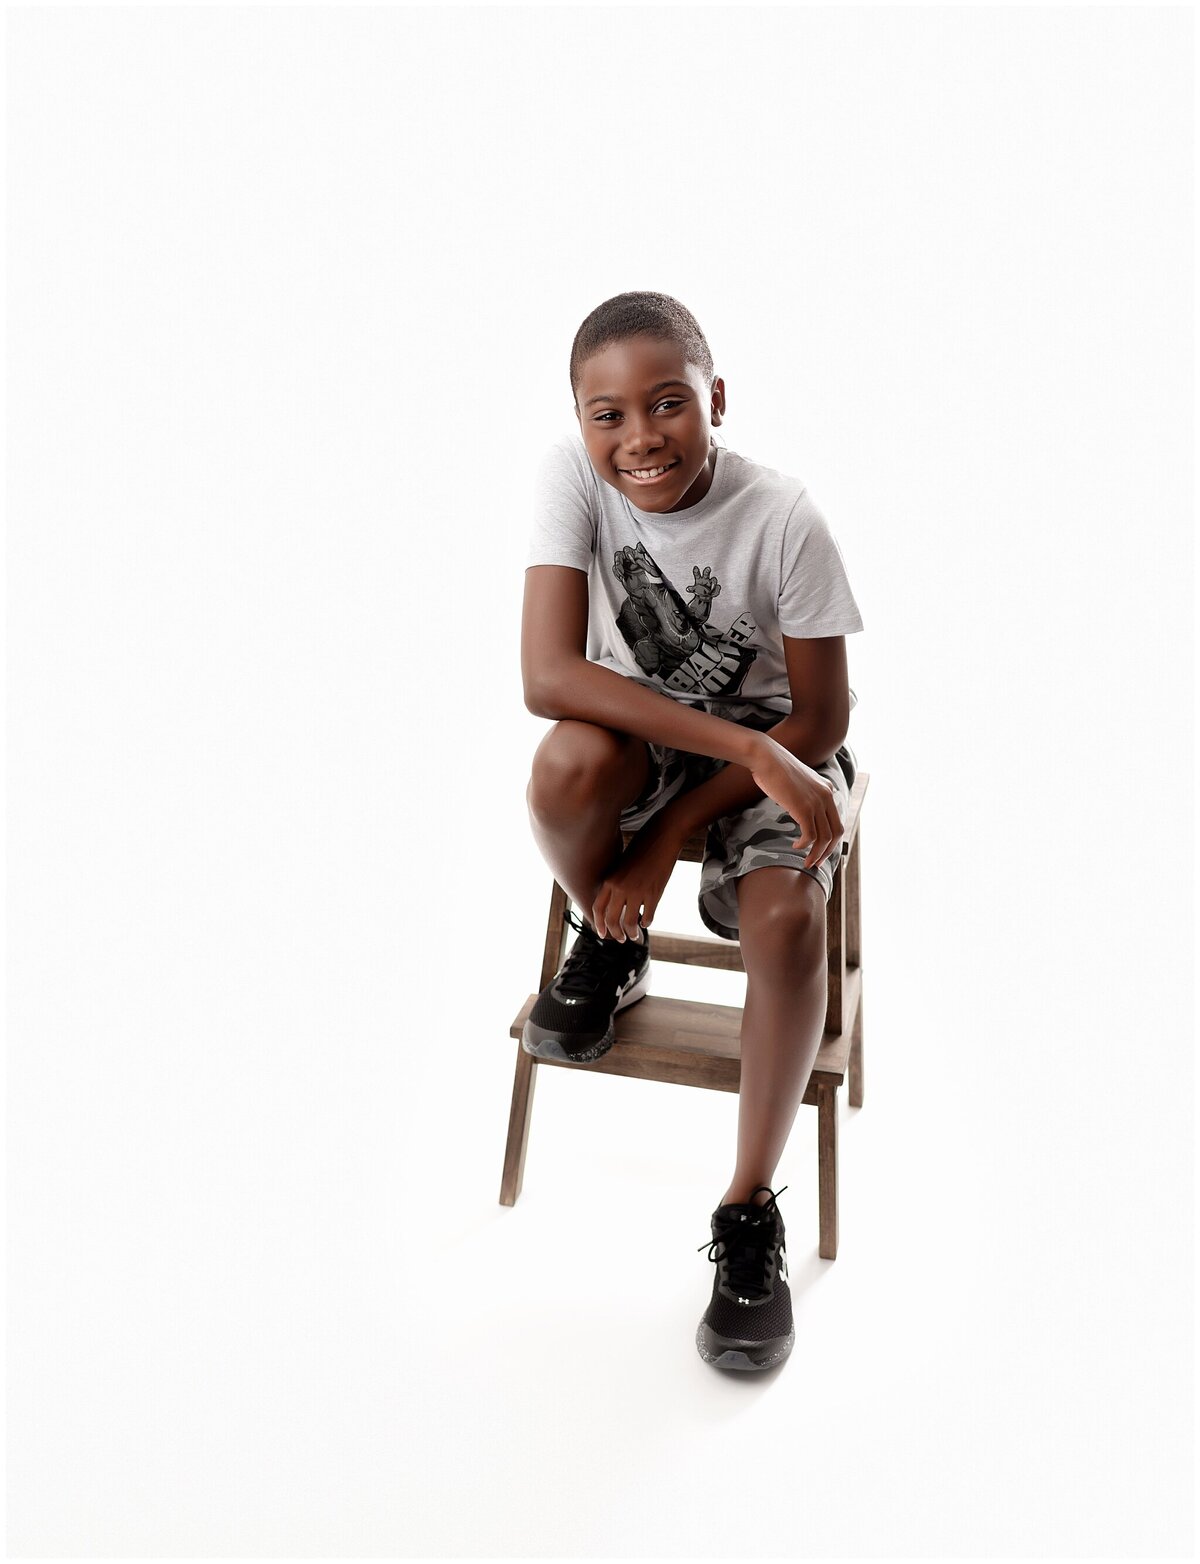 A portrait of a boy sitting on a stool with one leg on one step and the other foot on the floor. He is leaning one arm on his leg and looking at the camera.